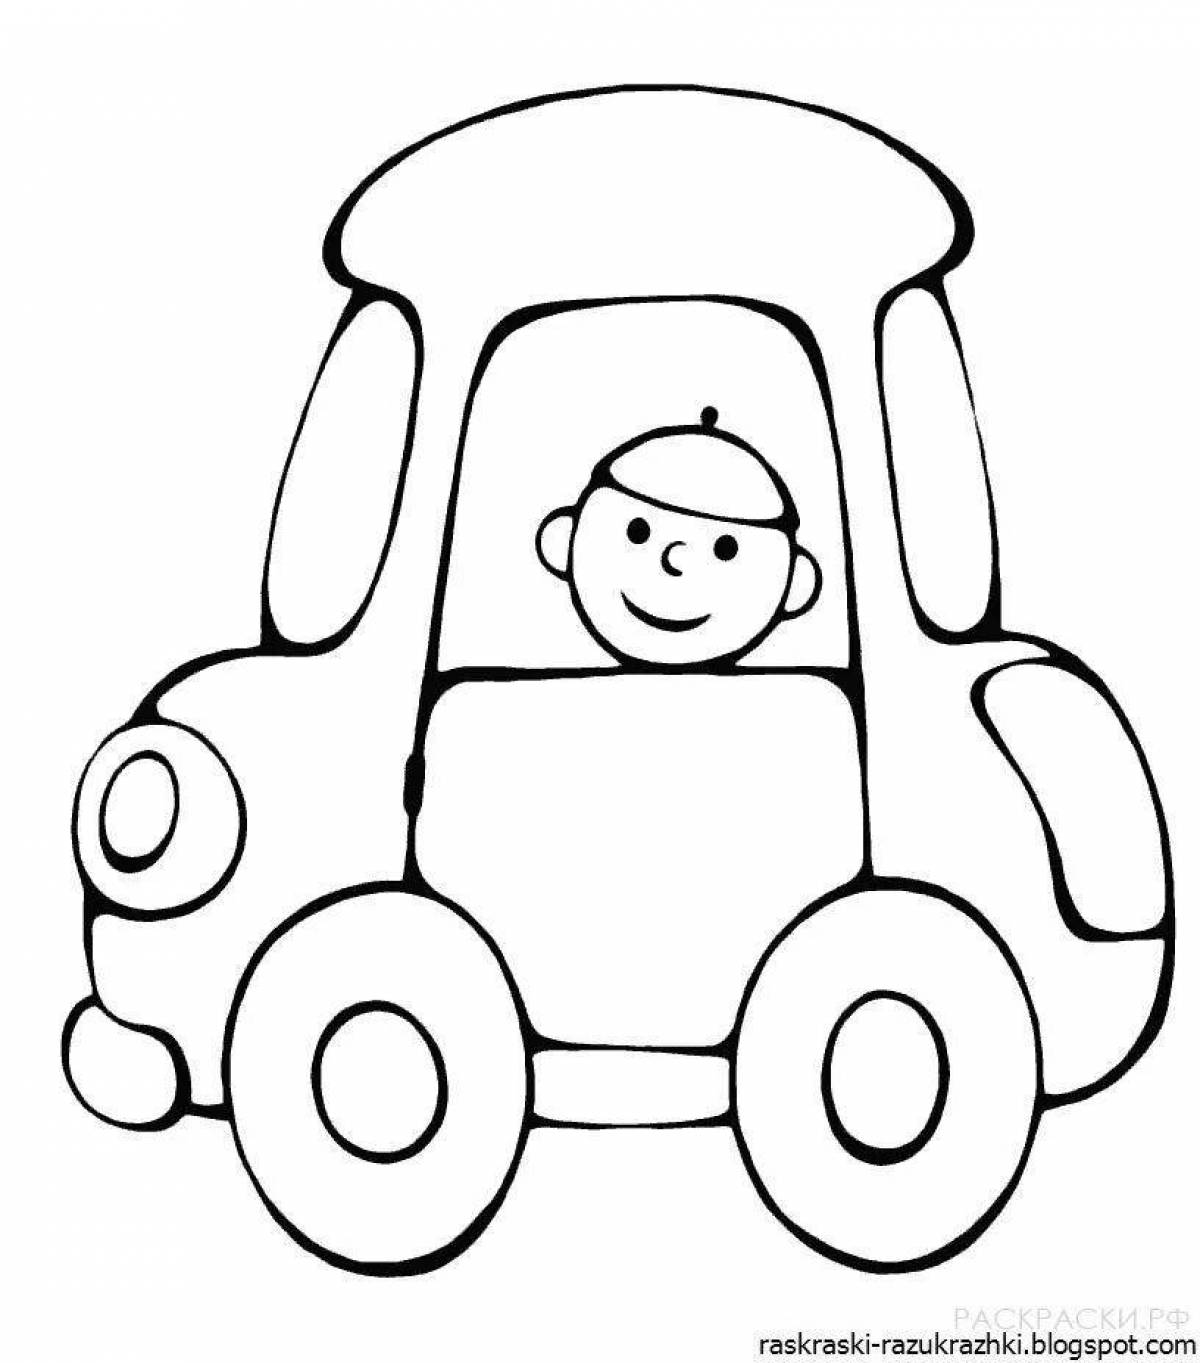 Coloring page adorable cars for 4 year olds